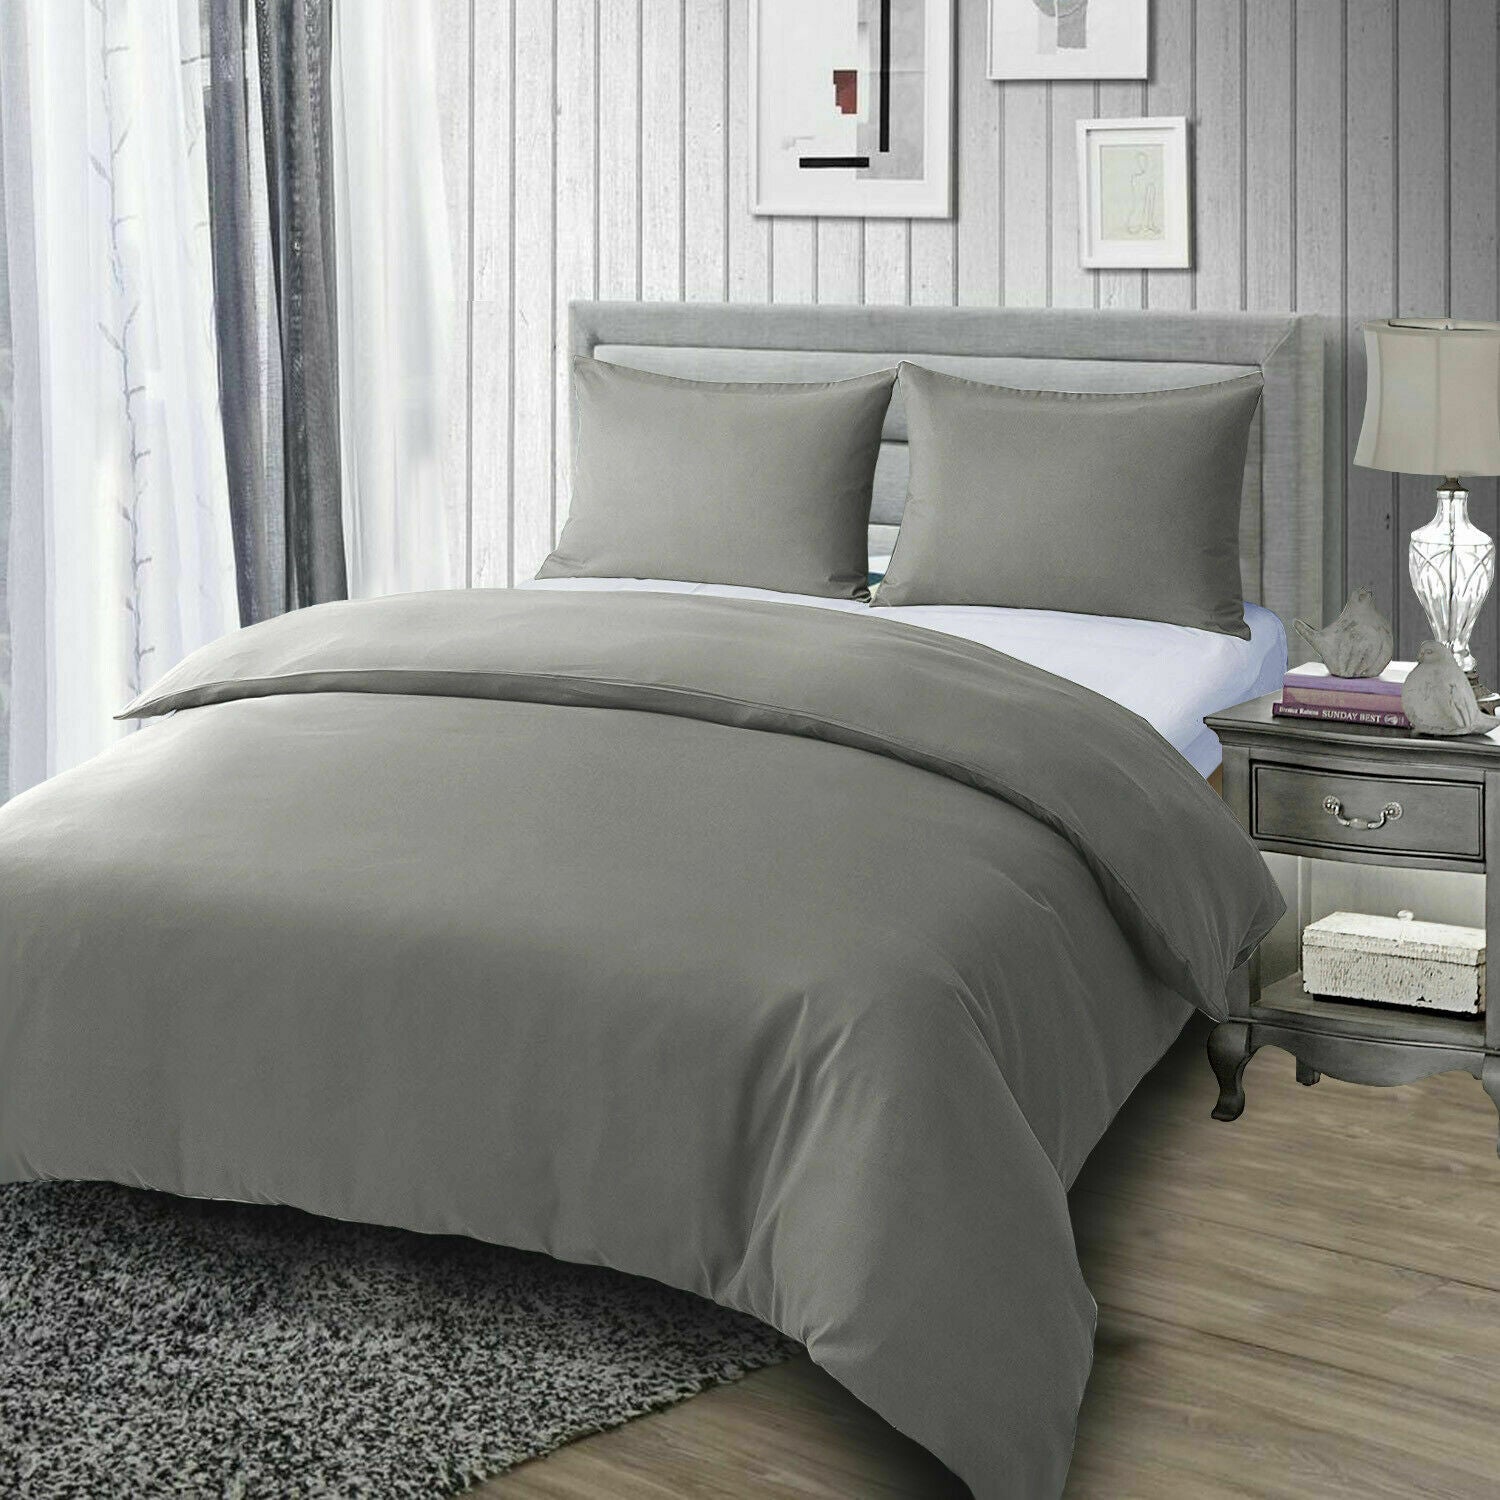 Duvet Cover & Pillowcase Set polycotton for superking bed